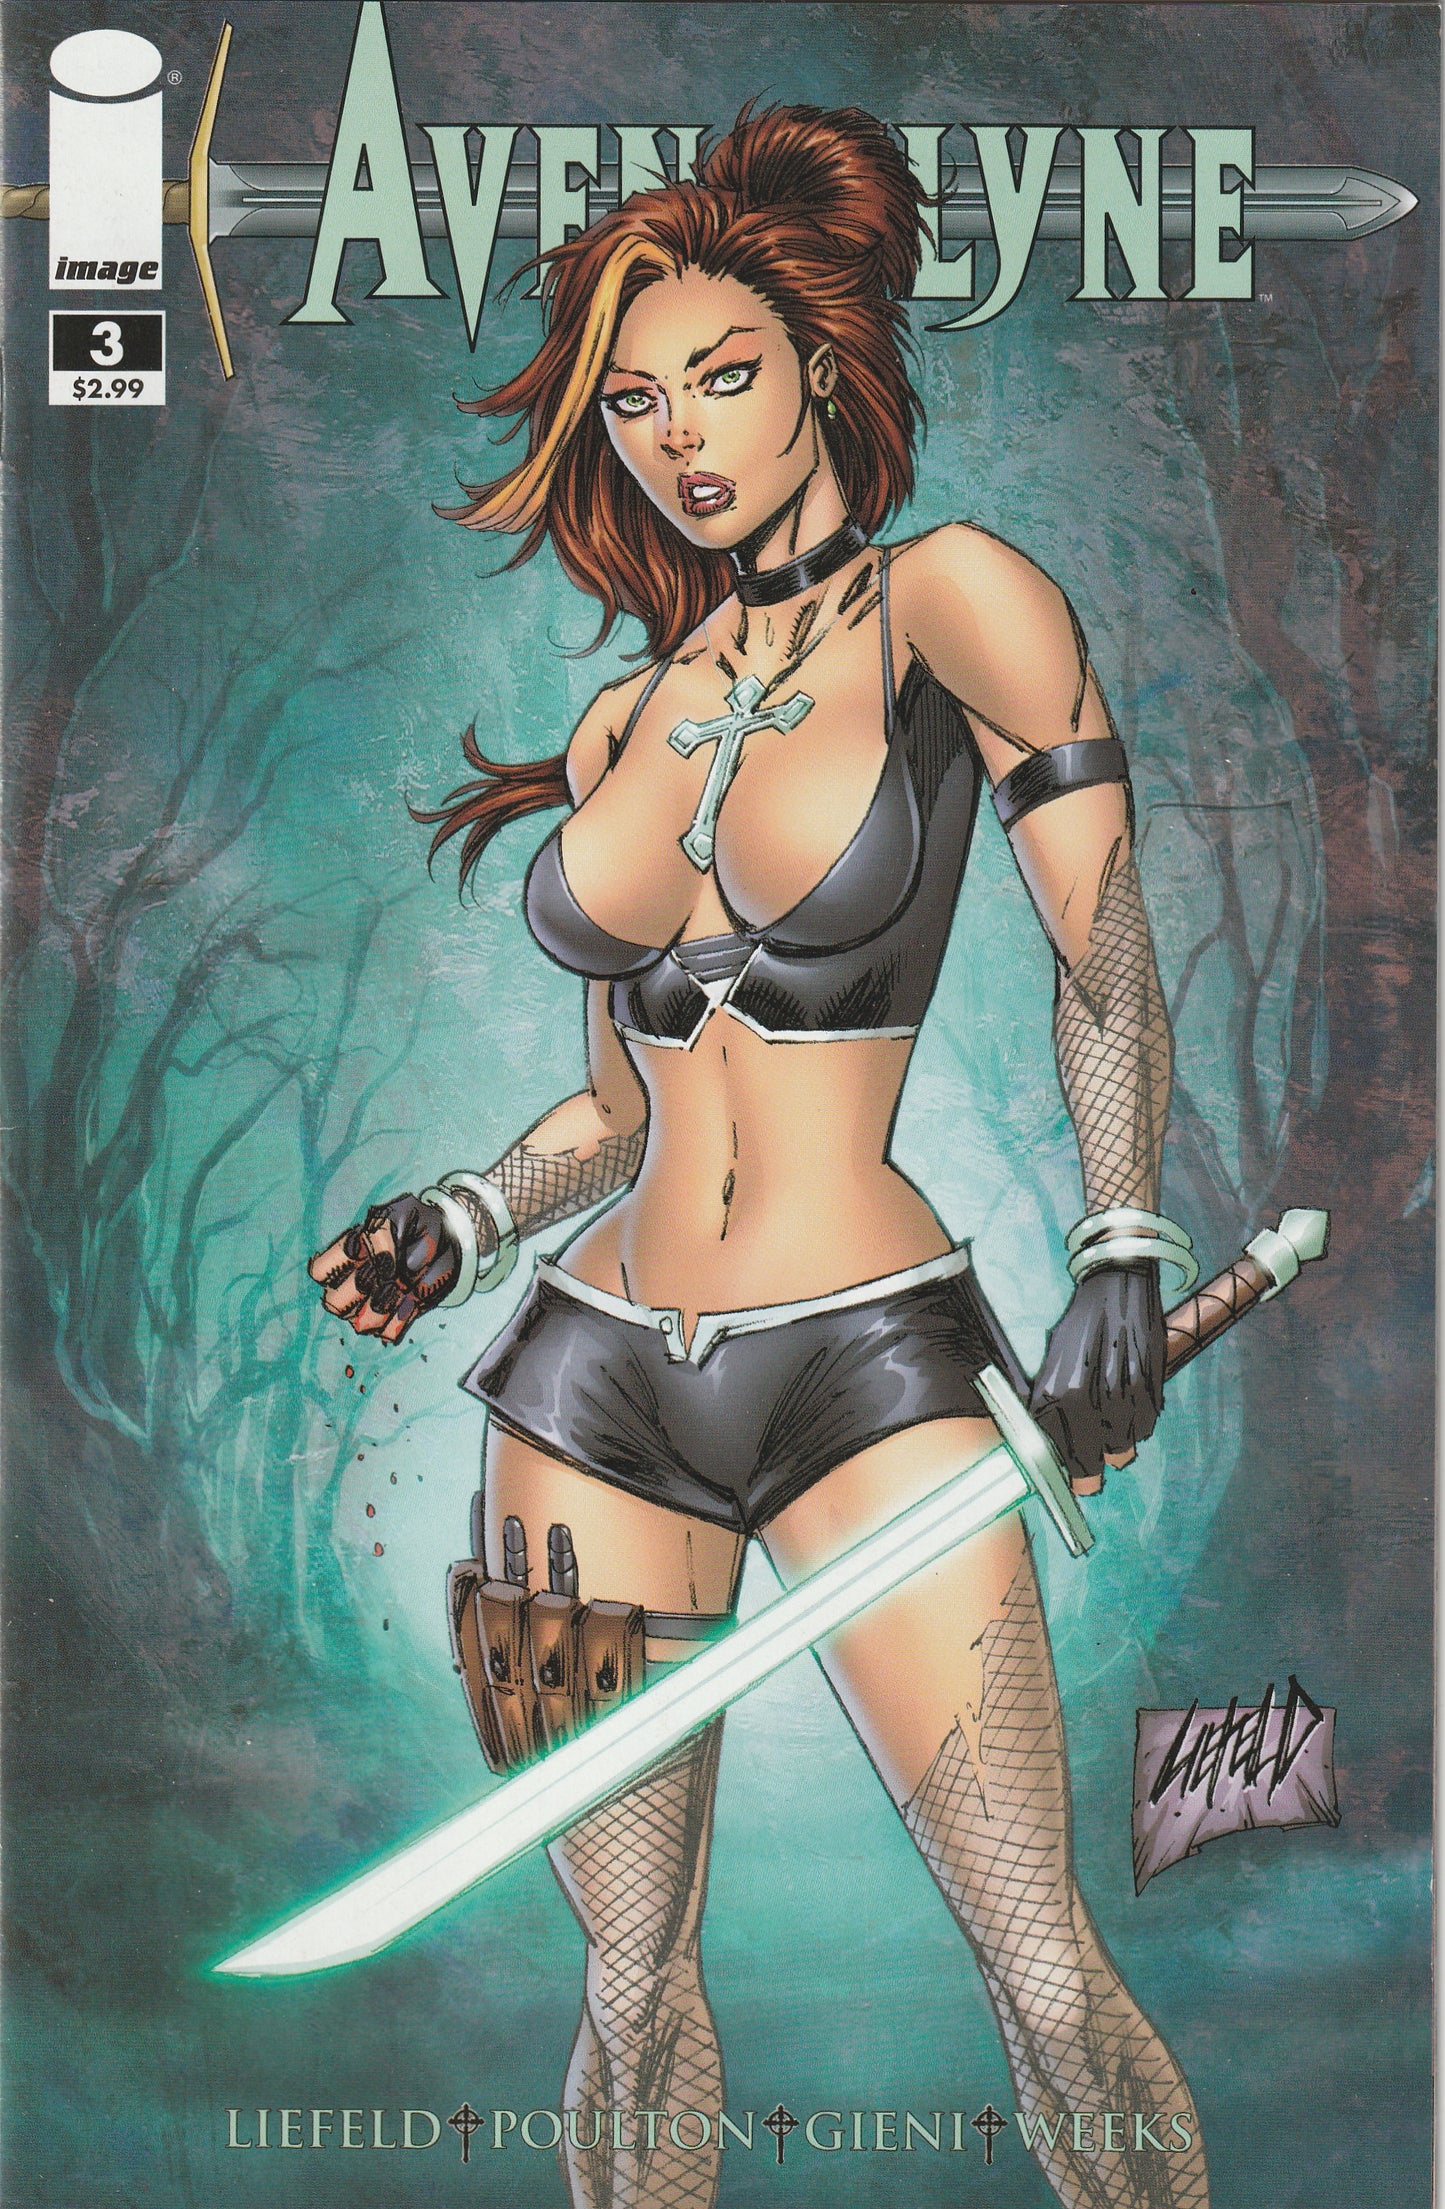 Avengelyne #3 (2011) - Cover A Rob Liefeld